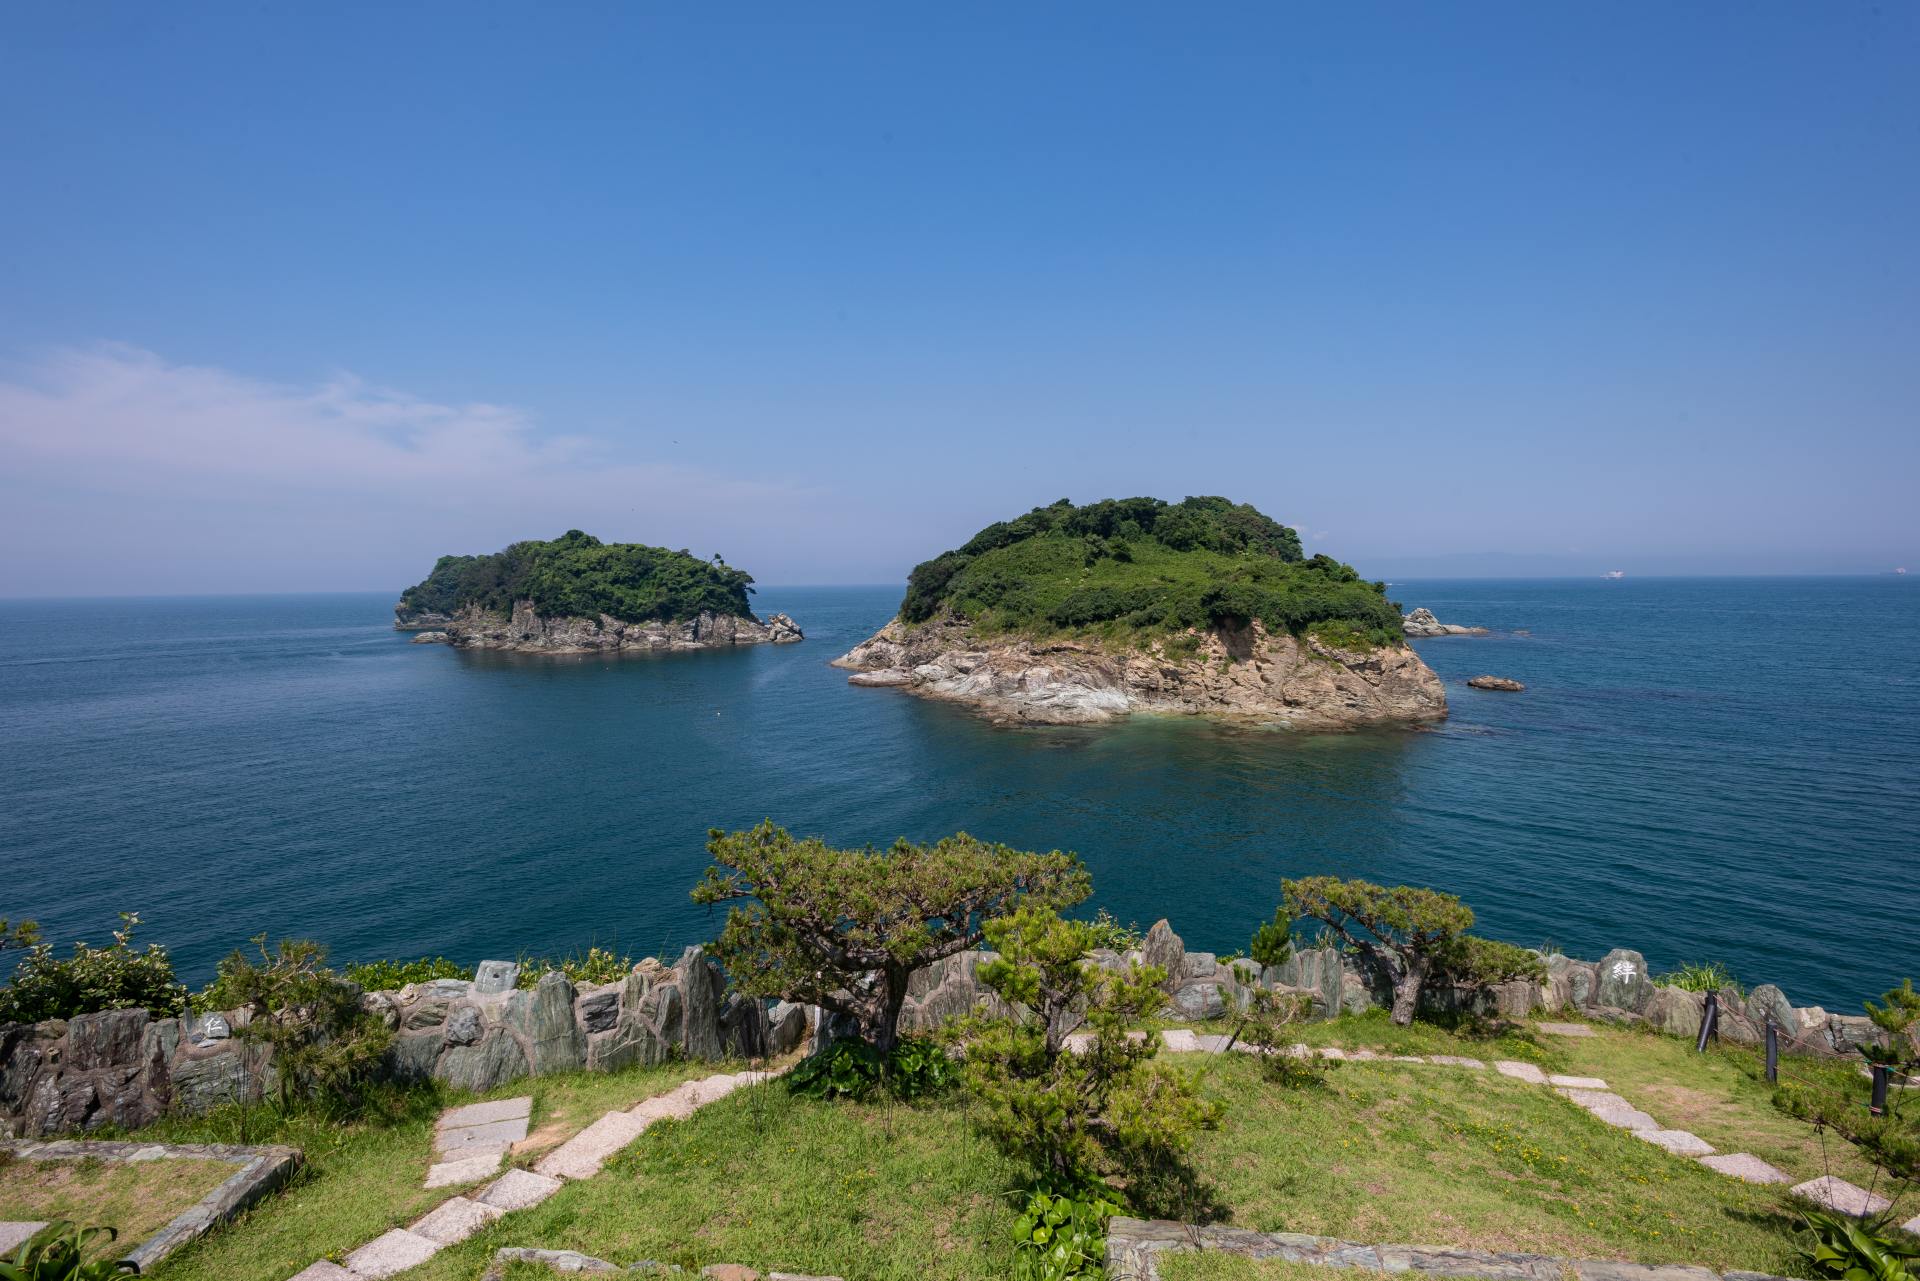 Stunning vistas facing the Kii Channel. You can see as far as Awaji Island or even Shikoku on a clear day.